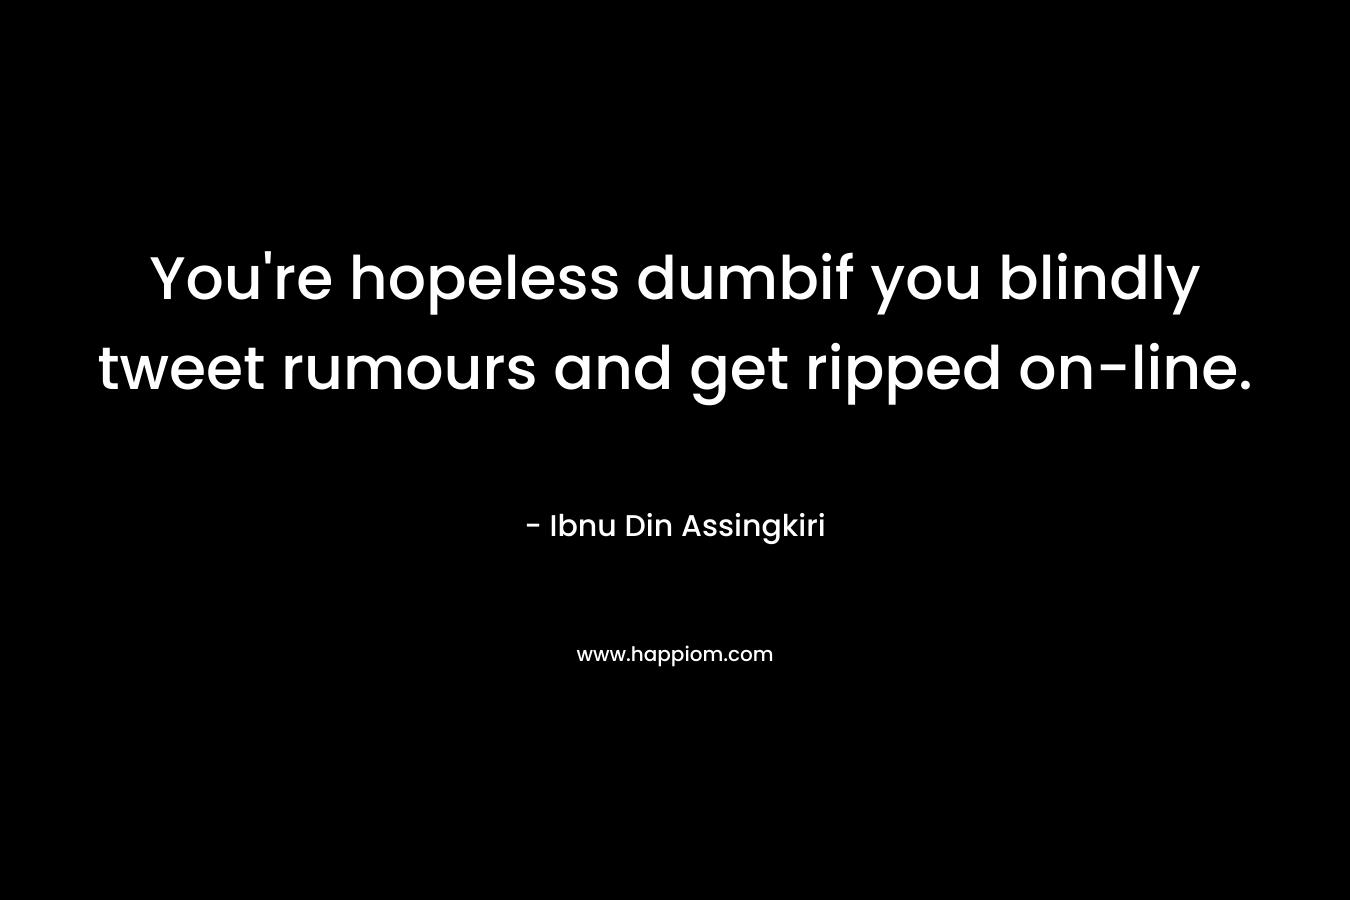 You're hopeless dumbif you blindly tweet rumours and get ripped on-line.